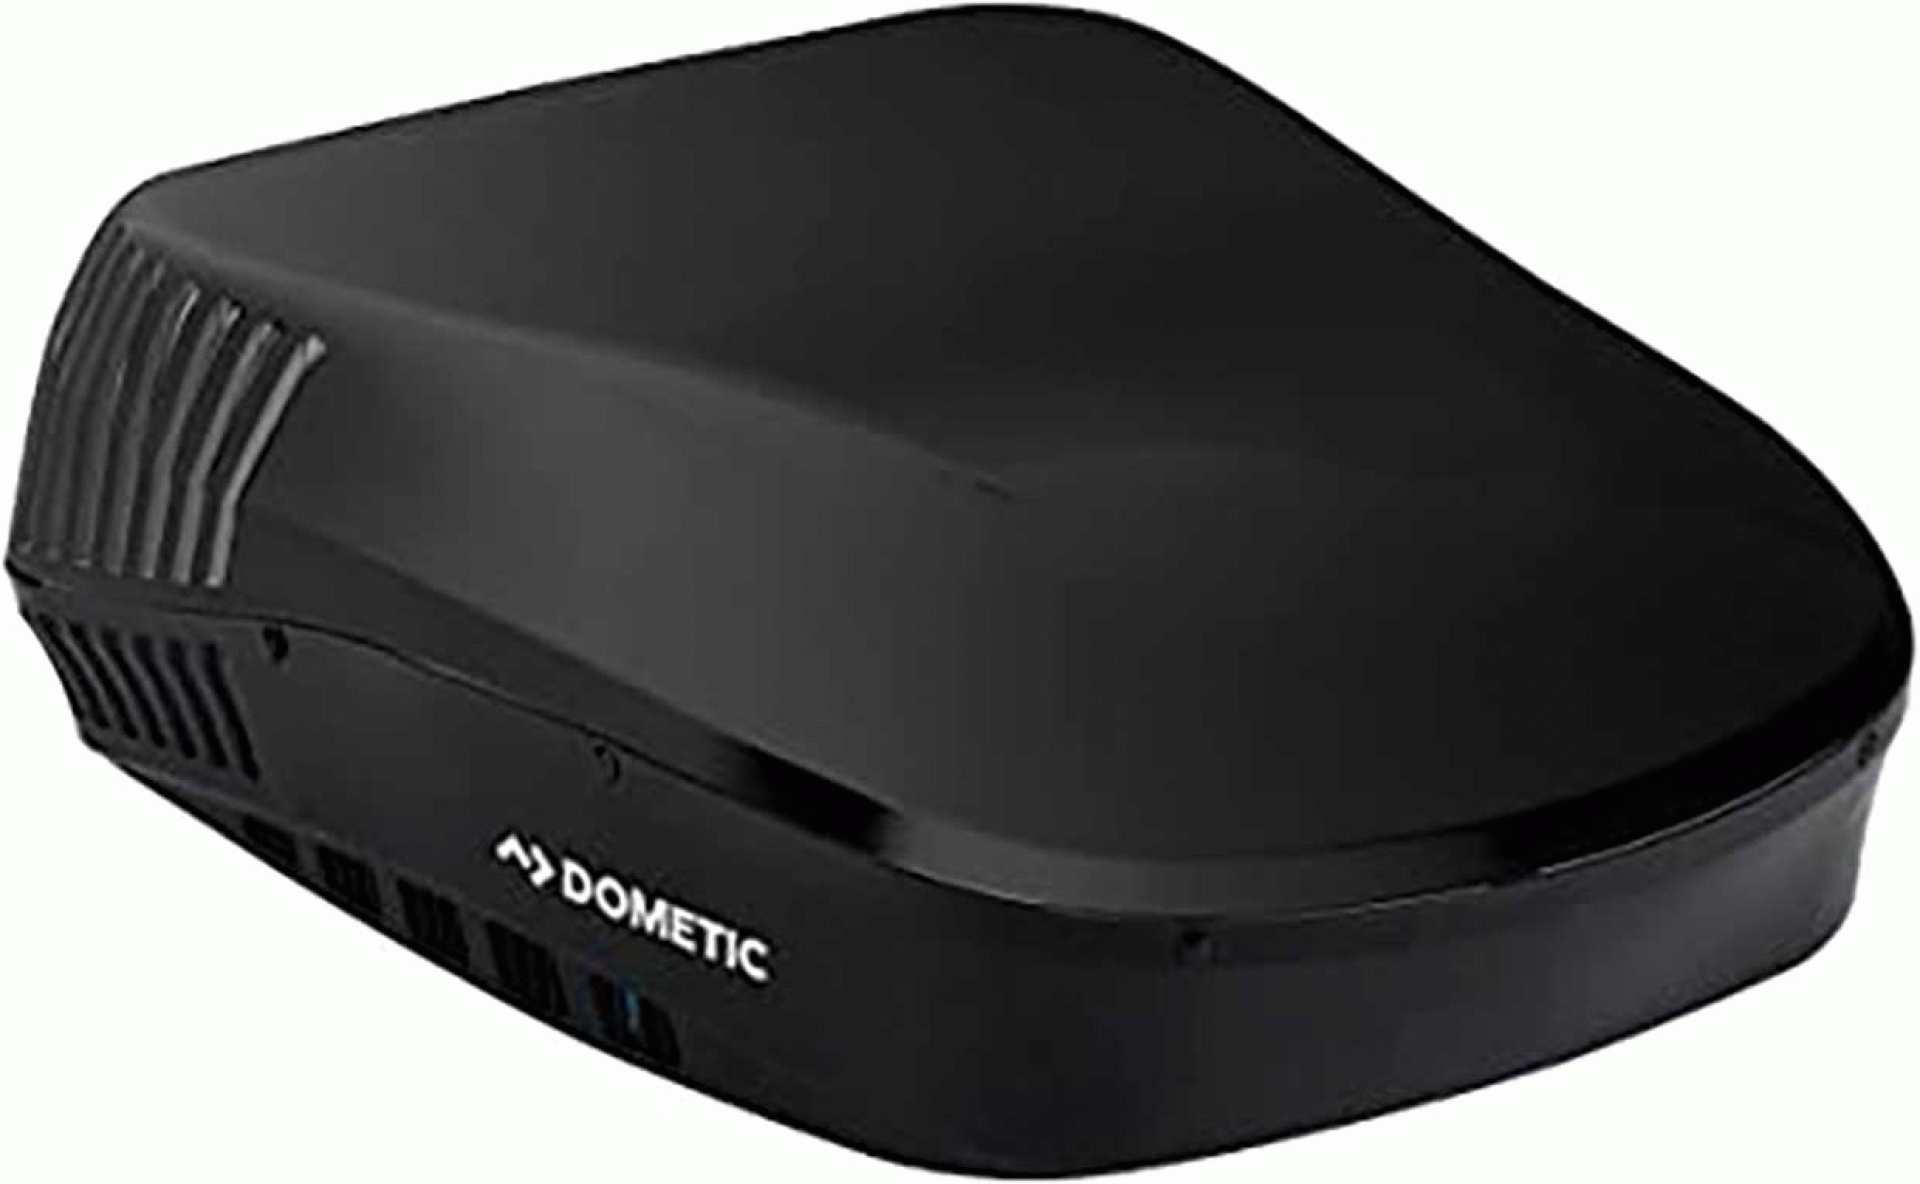 DOMETIC | H541916AXX1J0 | Blizzard NXT 15 000 BTU Air Conditioner Ducted or Non-Ducted Black